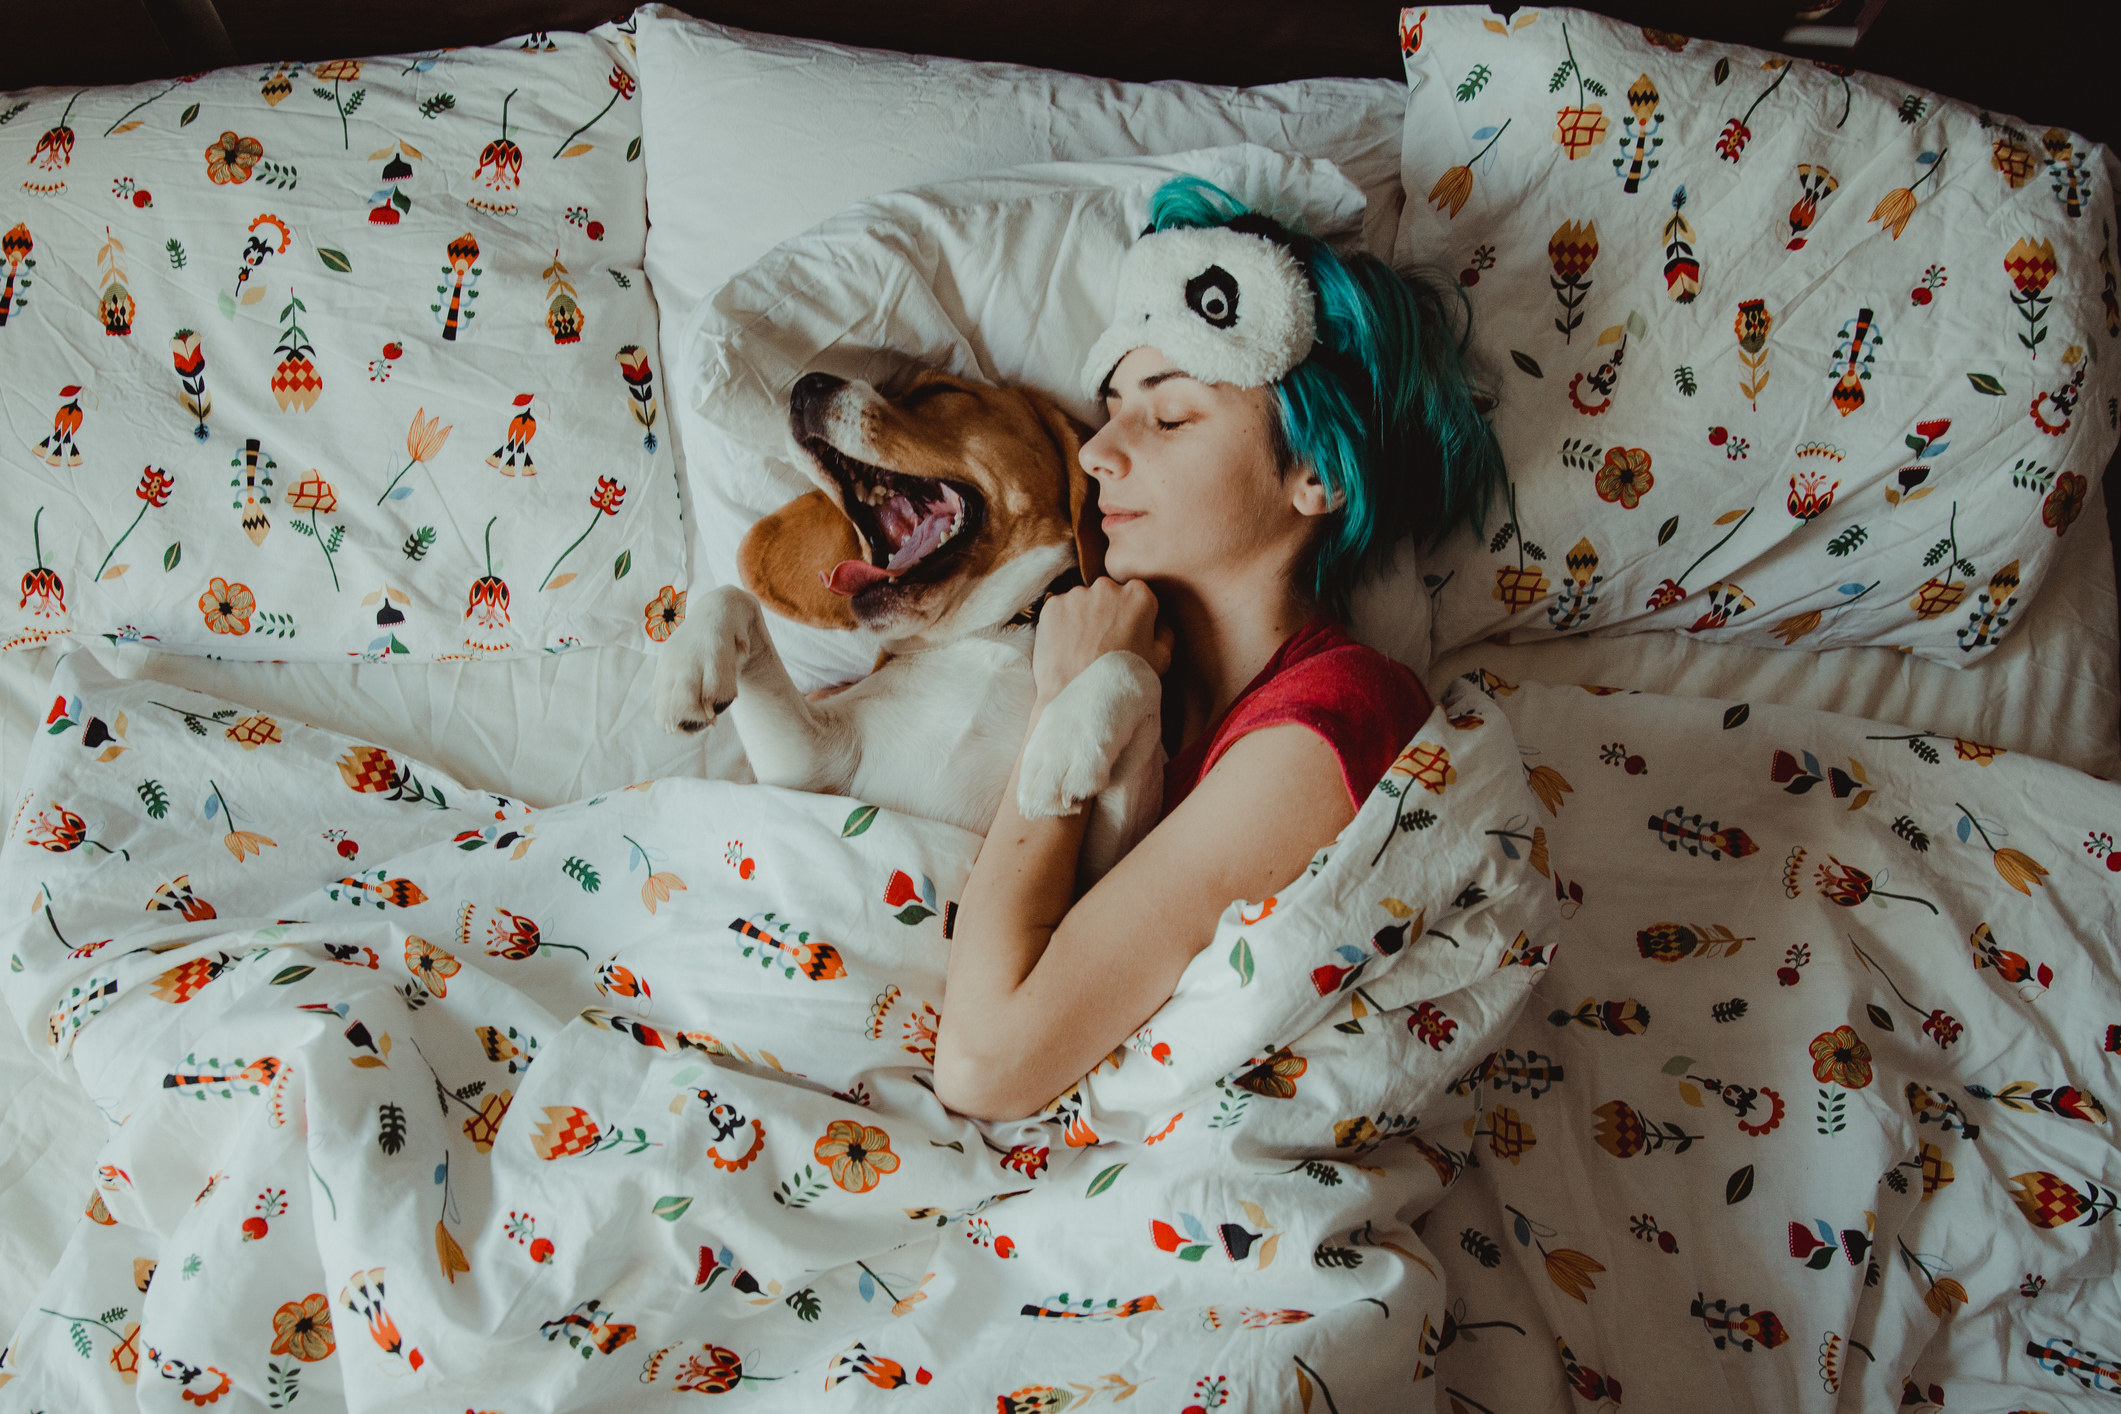 Woman with blue hair asleep with her dog.